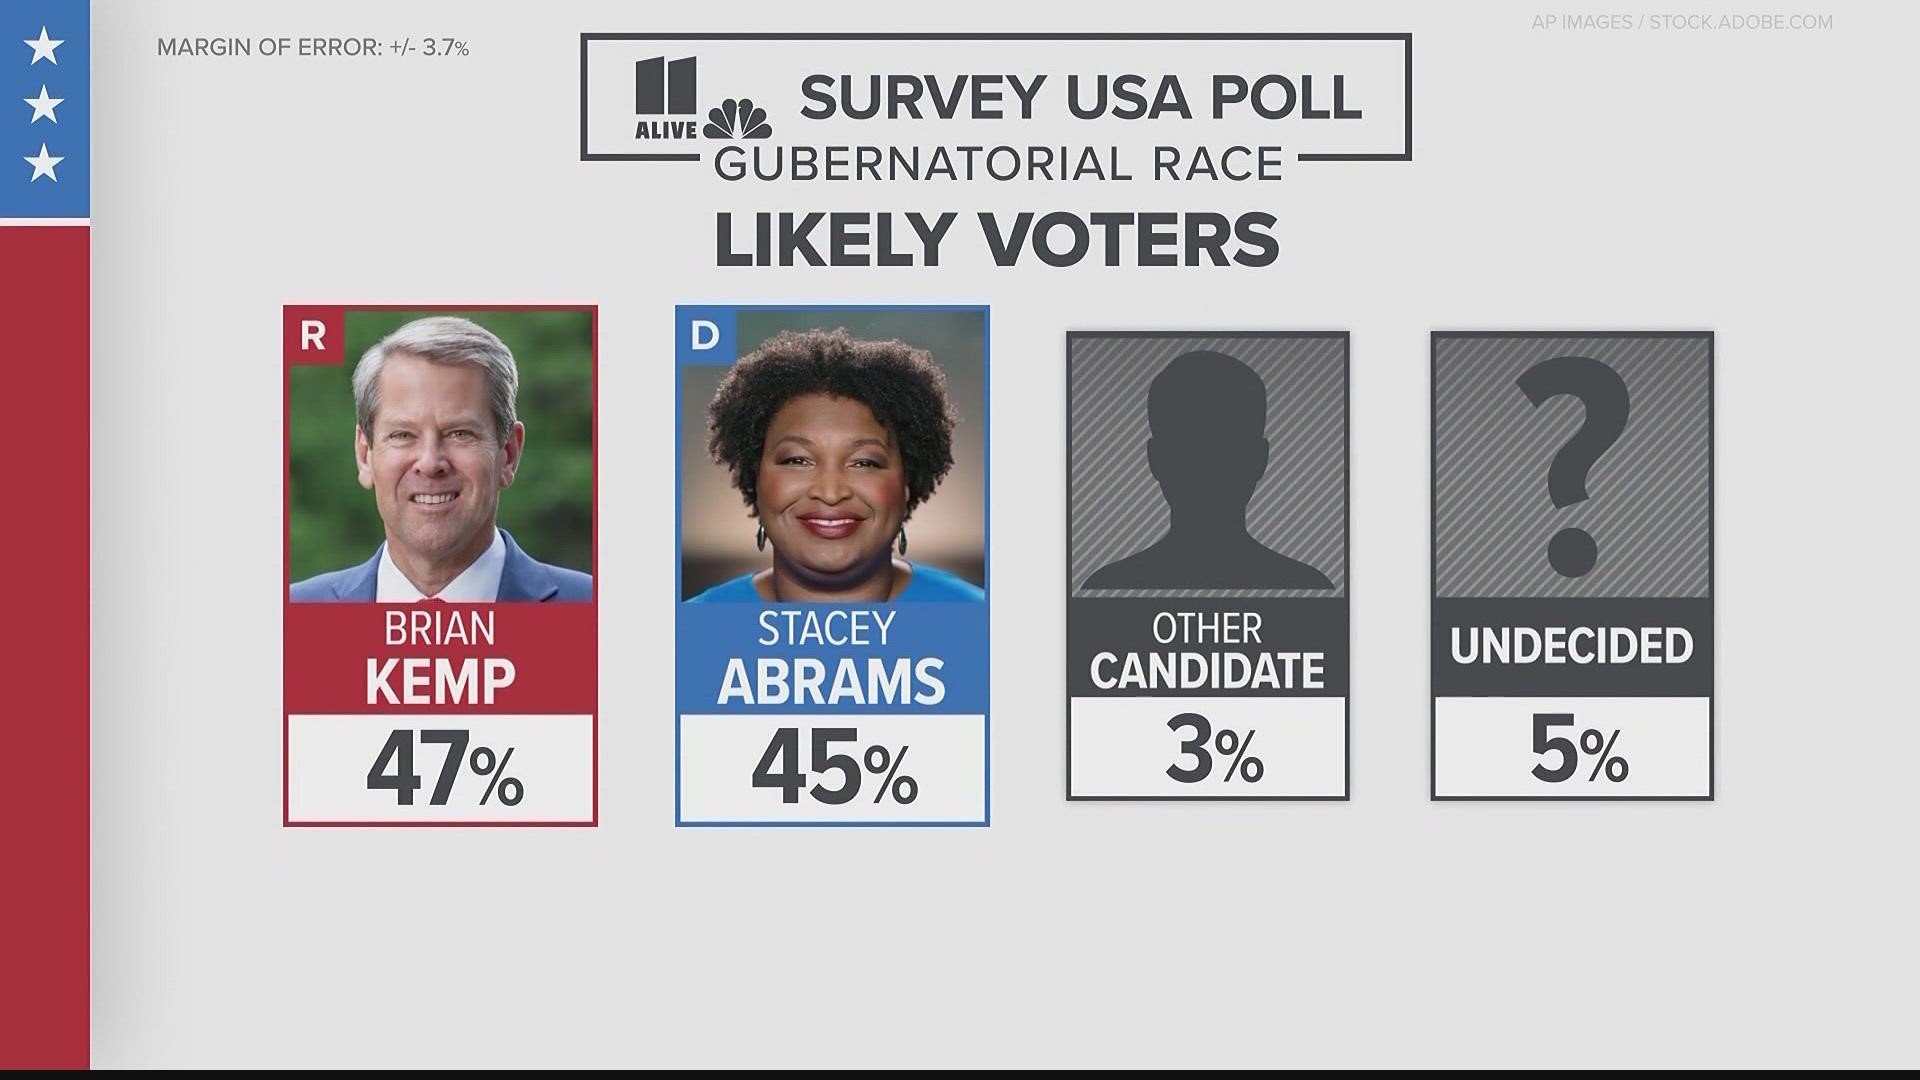 Here's an exclusive look at 11Alive's "Survey USA" poll just weeks before the election.